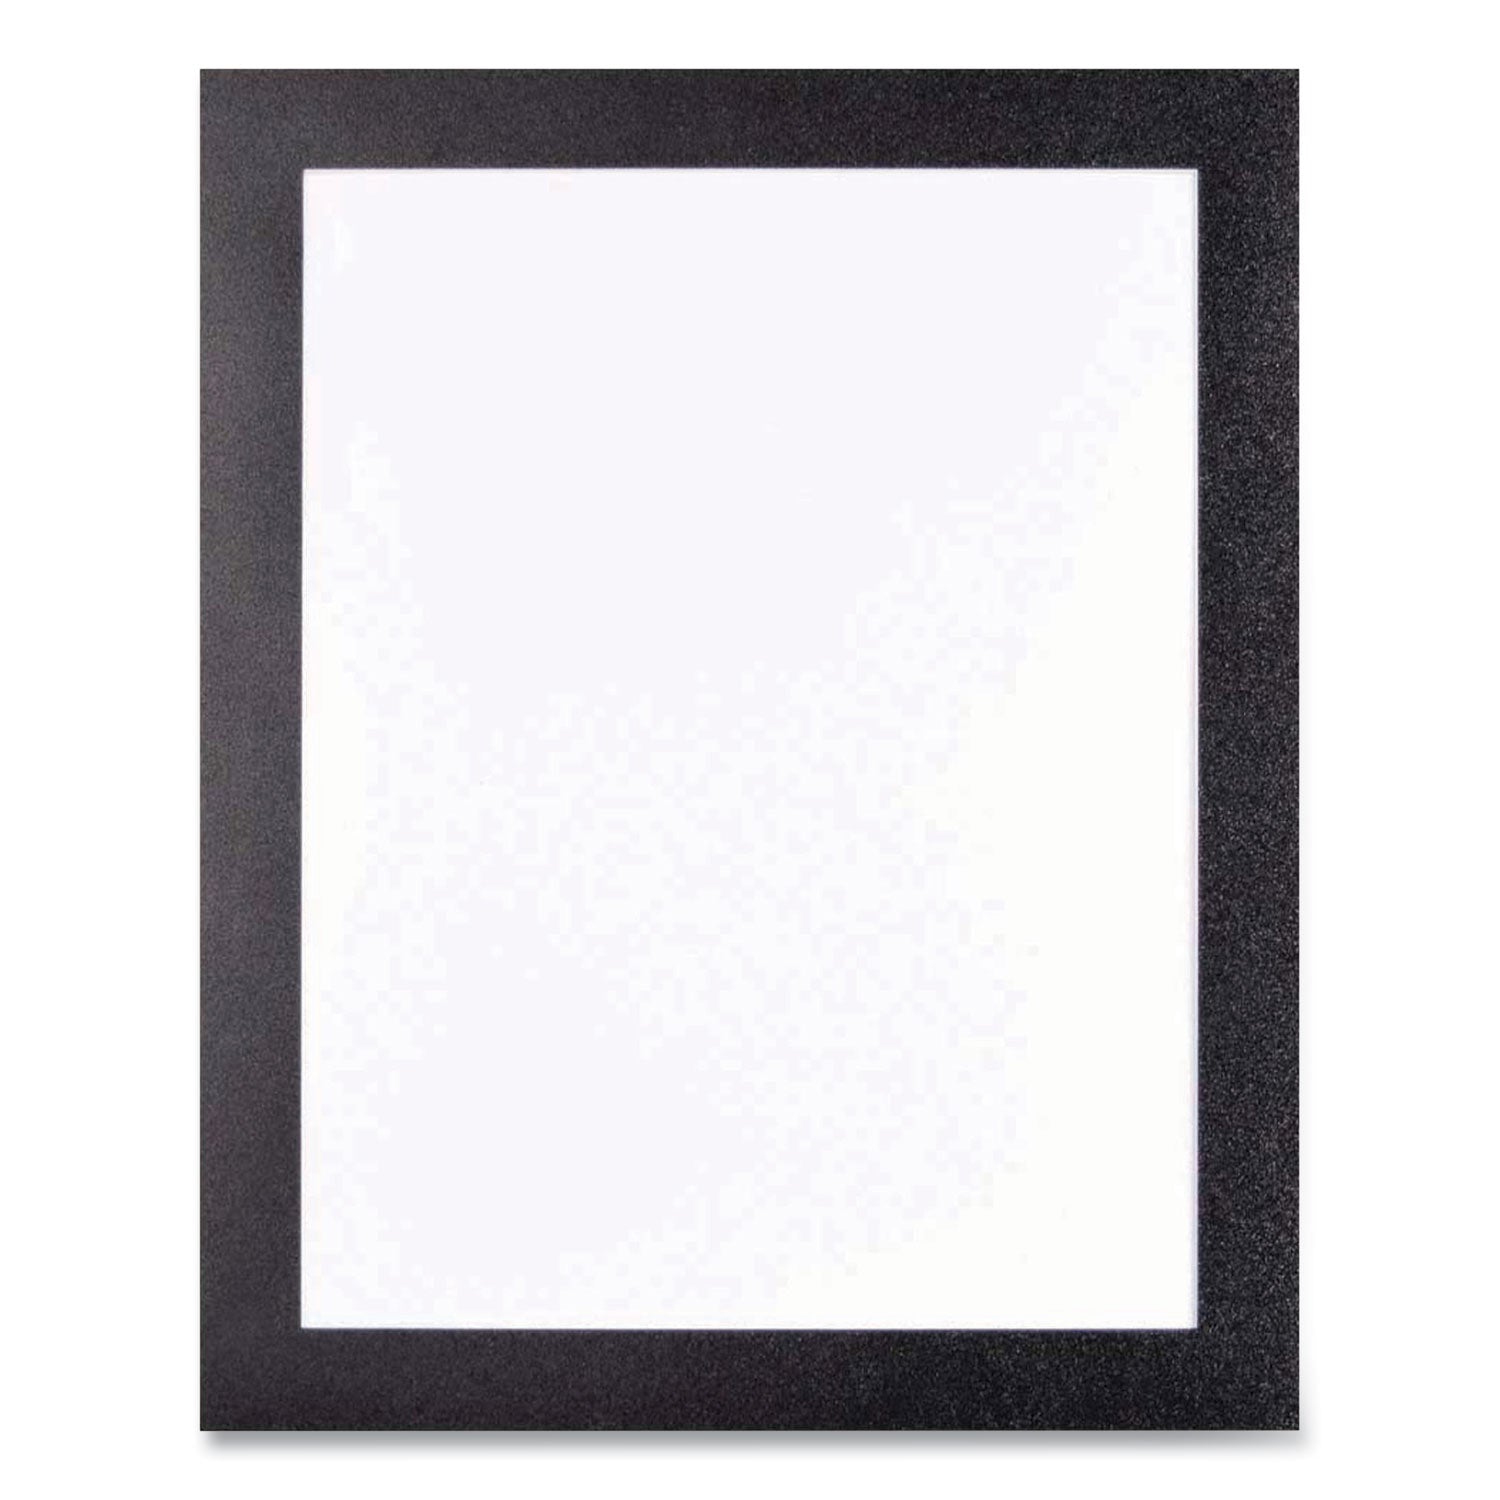 self-adhesive-sign-holders-11-x-17-insert-clear-with-black-border-2-pack_def68886b - 1